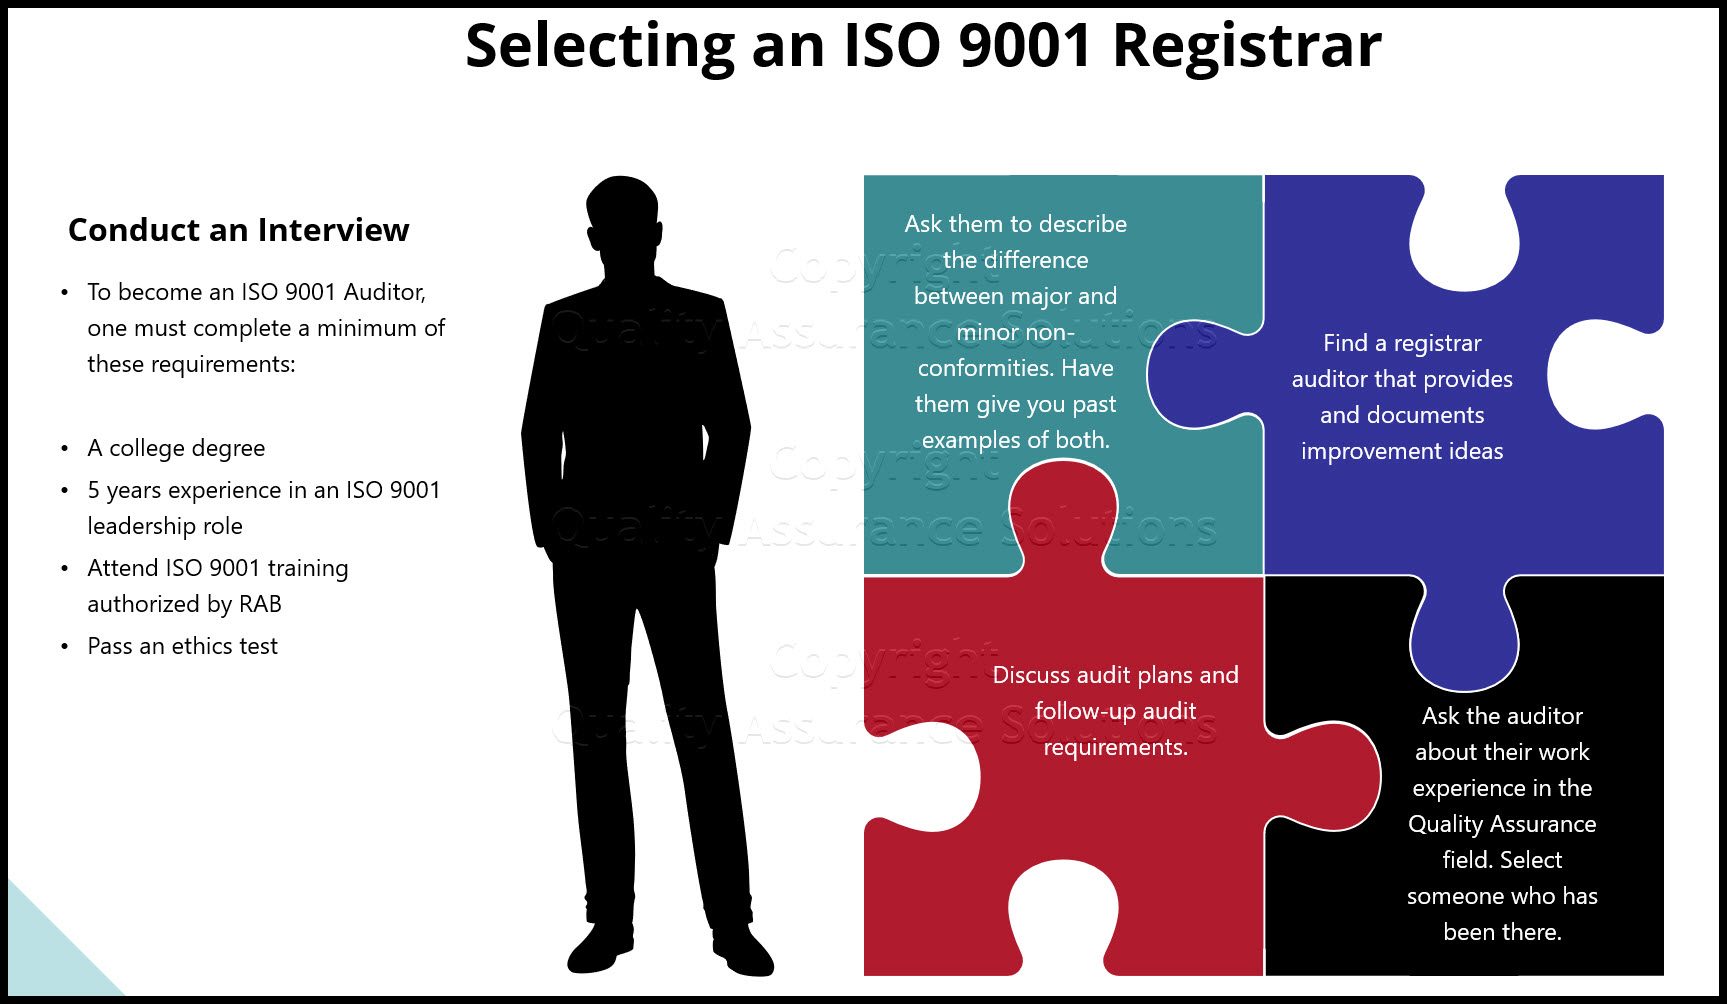 Selecting a competent  ISO 9001 Auditor is critical to registration. Assure your auditor fits well with your company and your Quality Assurance systems. 